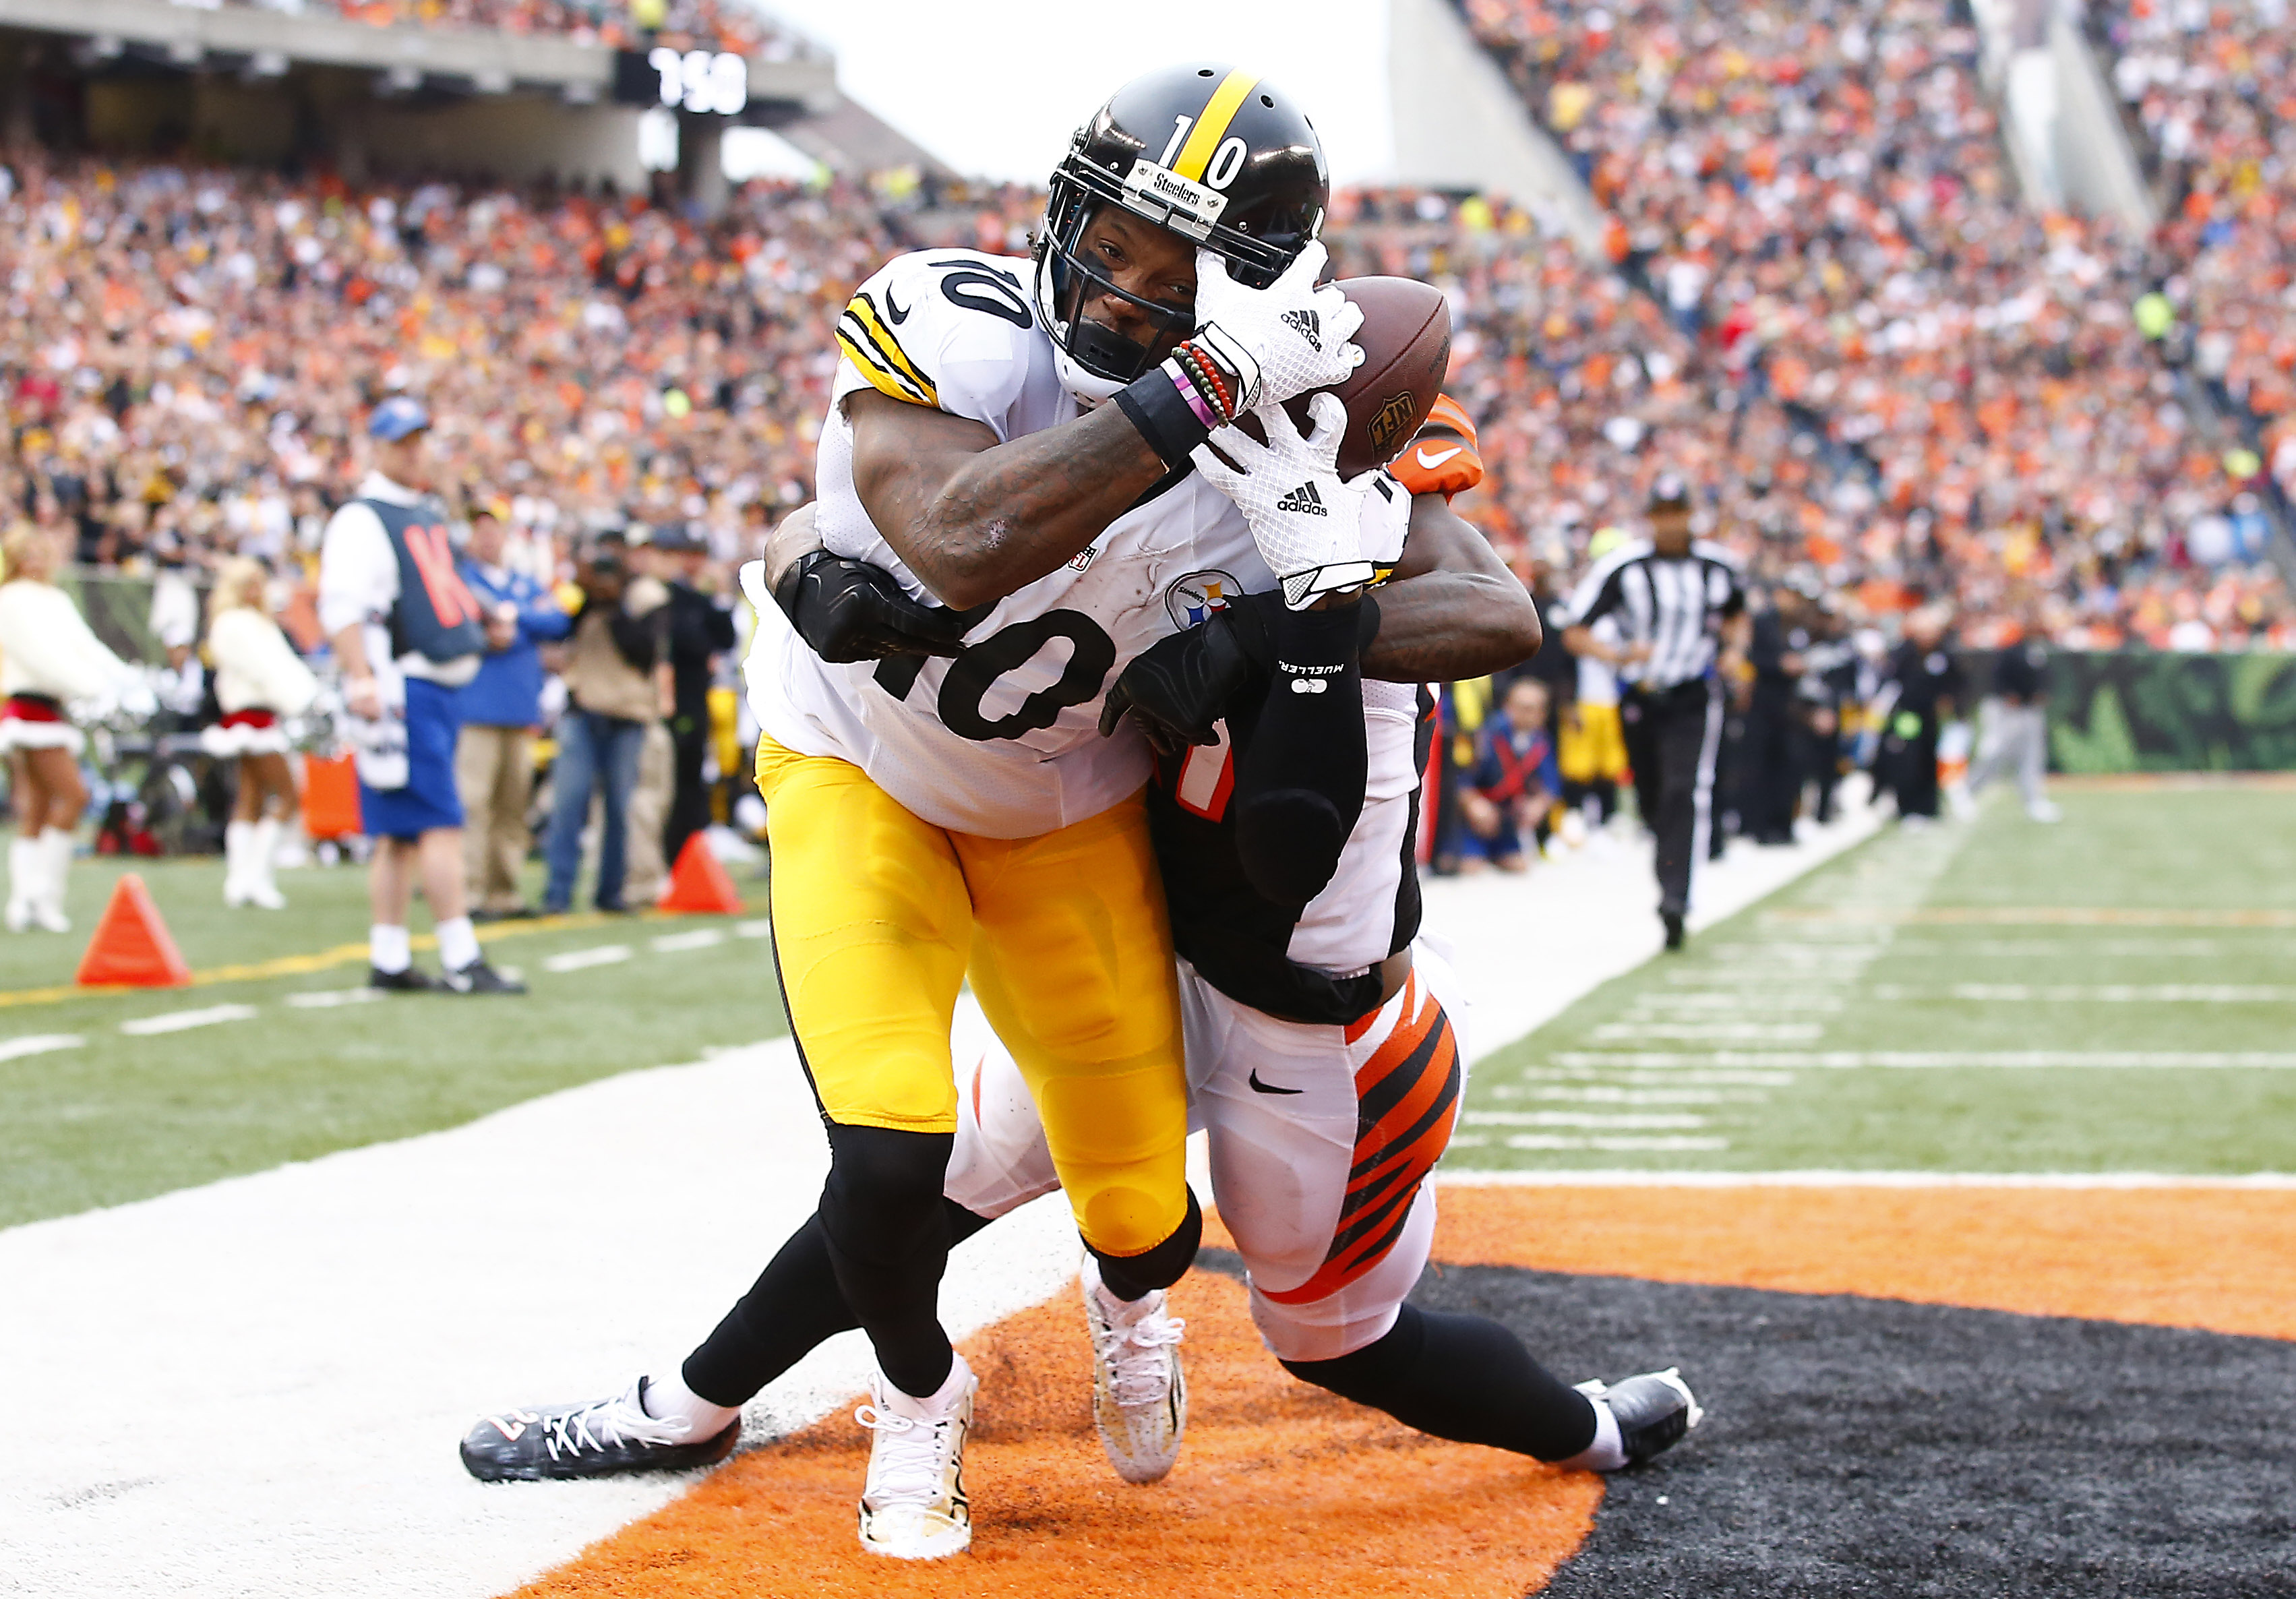 Martavis Bryant Nearly Es Up With A Side Of The Helmet